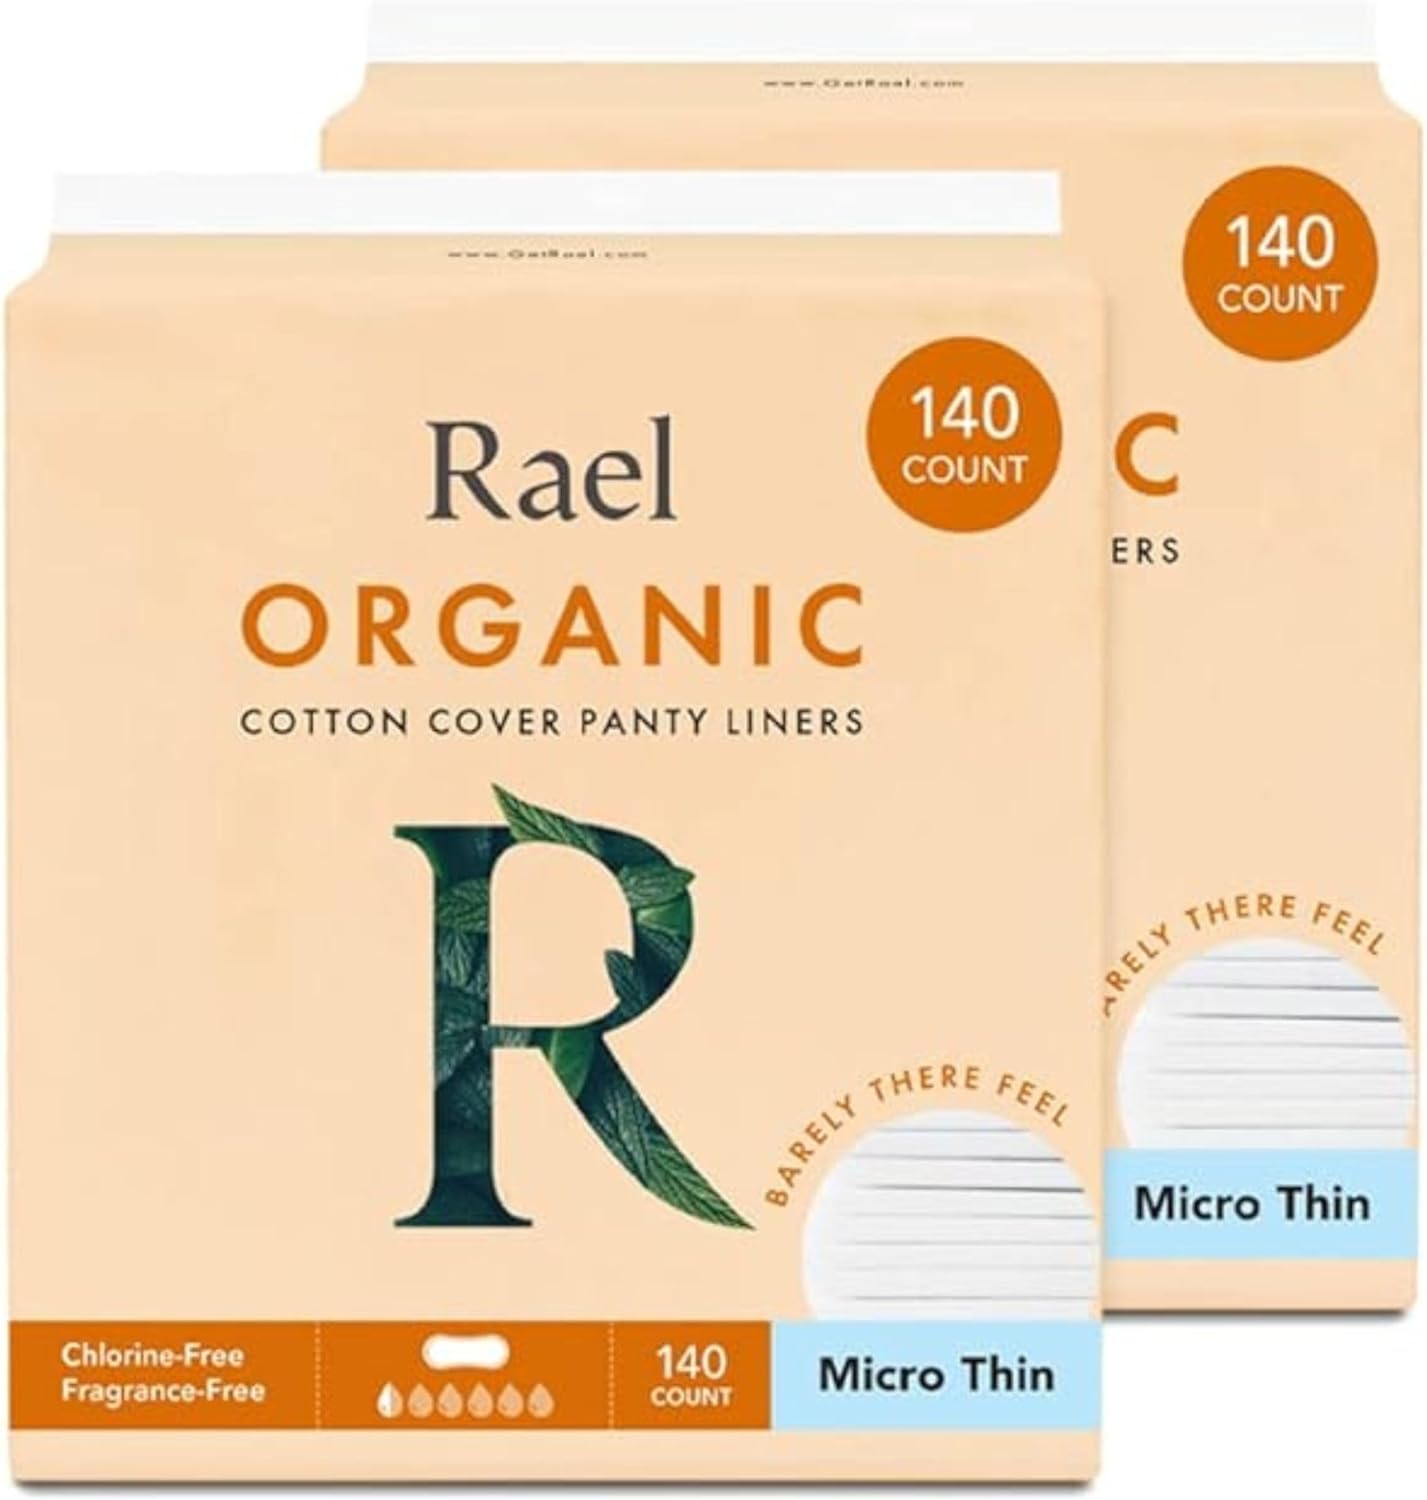 Rael Panty Liners for Women, Organic Cotton Cover - Thin Pantiliners, Light Absorbency, Unscented, Chlorine Free (Micro Thin, 280 Count)